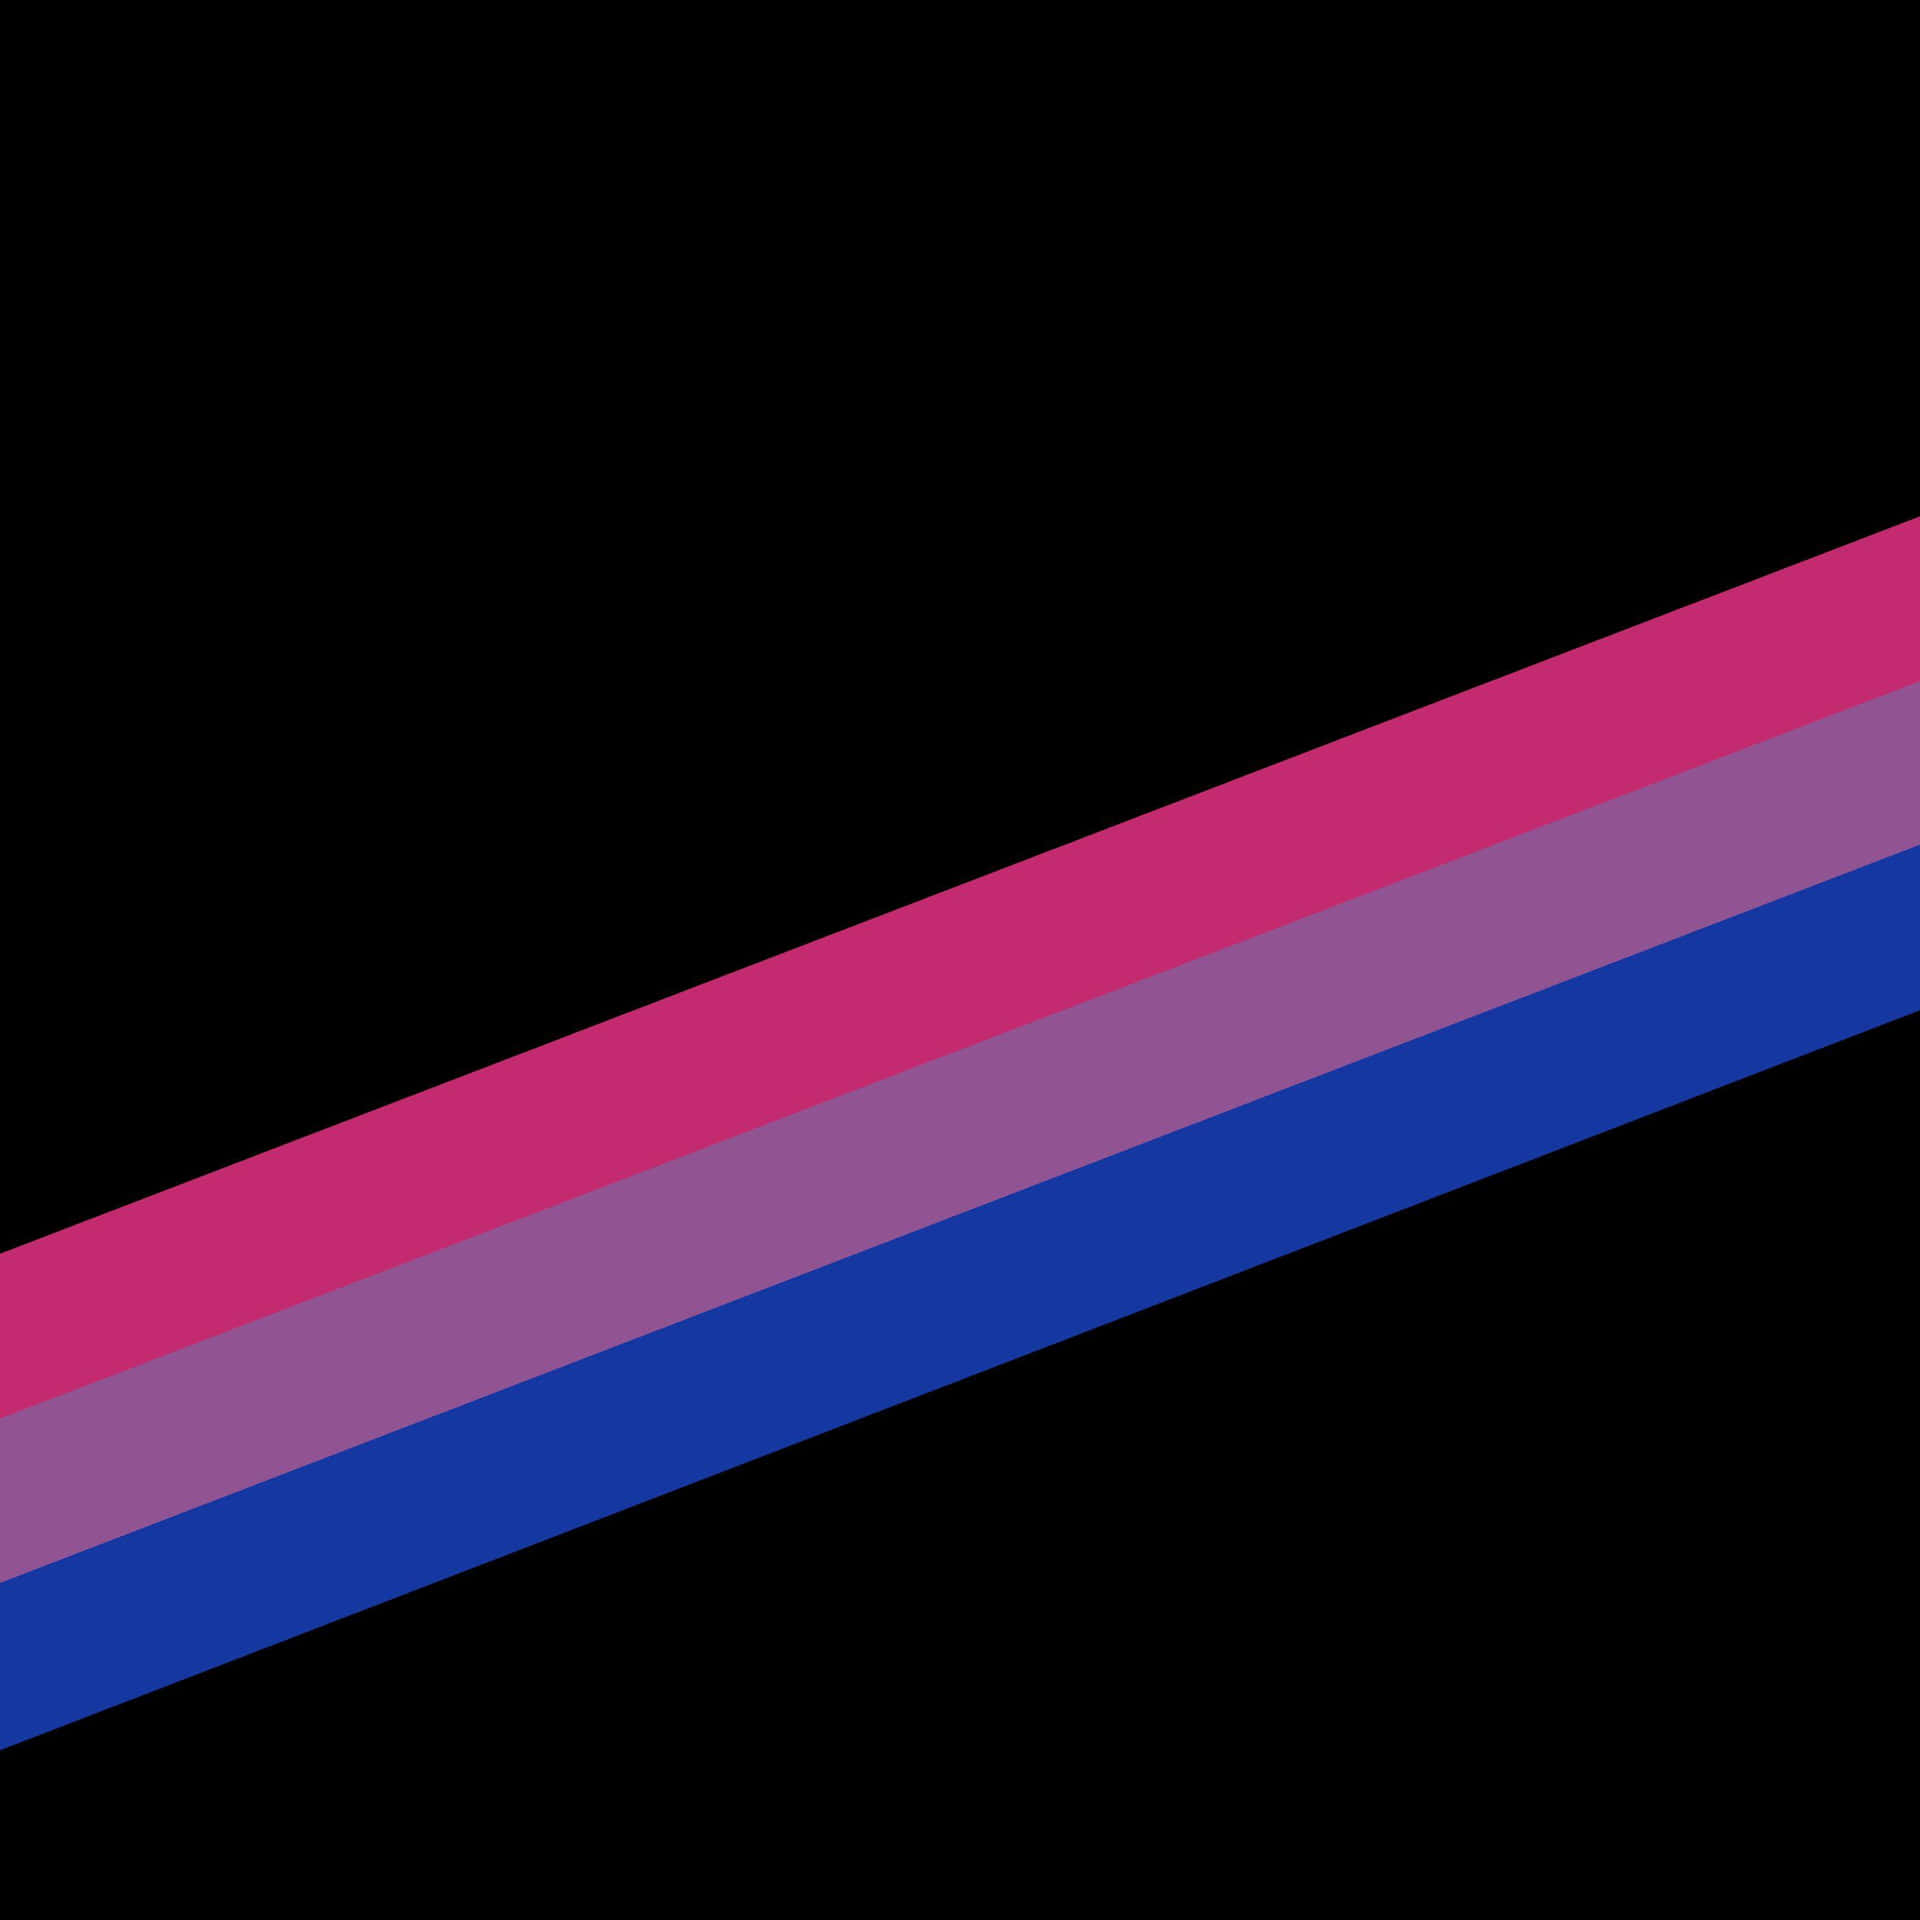 A Blue, Pink And Purple Striped Line